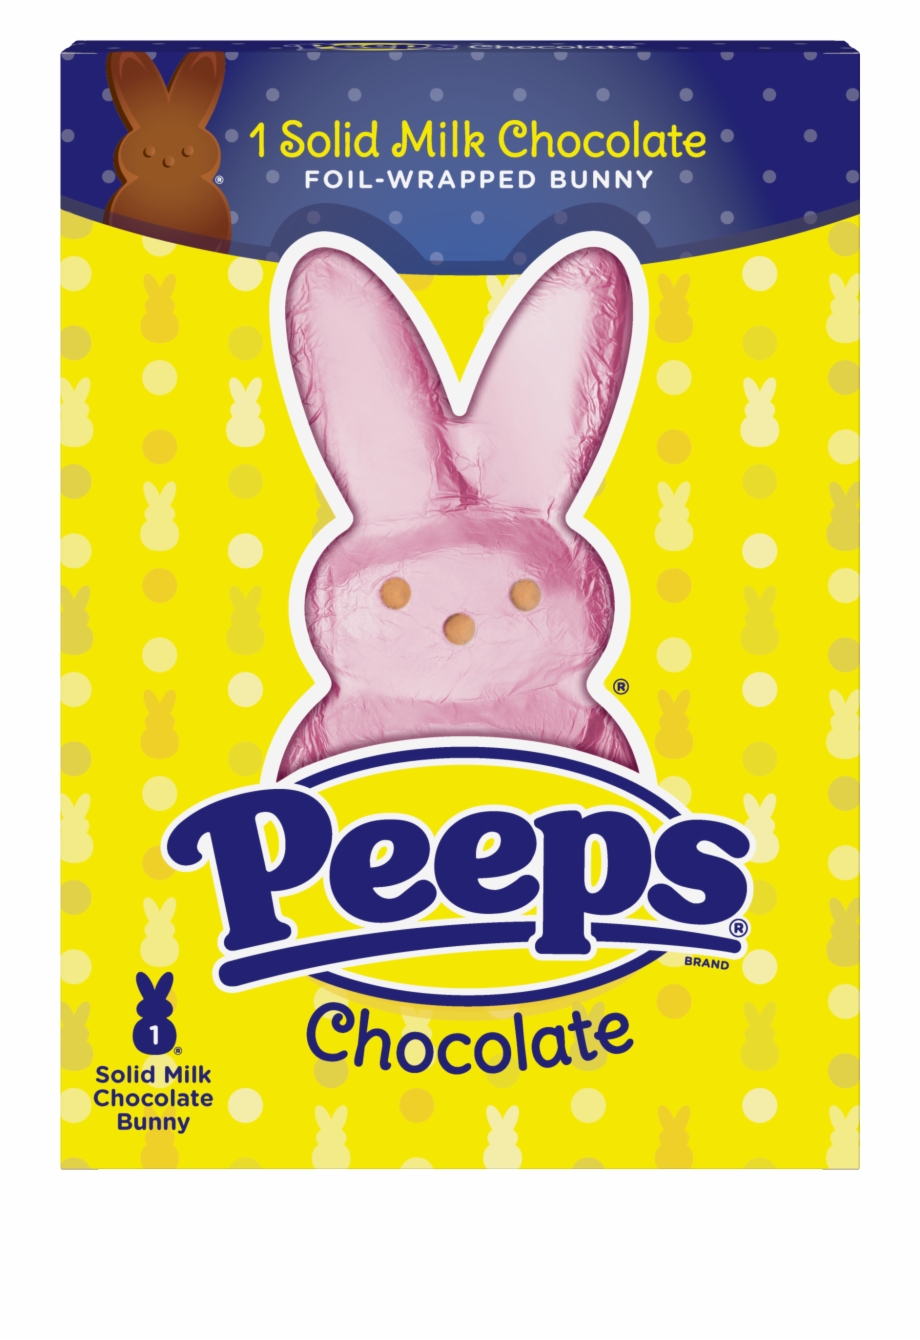 Peeps Easter 2019 Candy Collection Will Inspire You